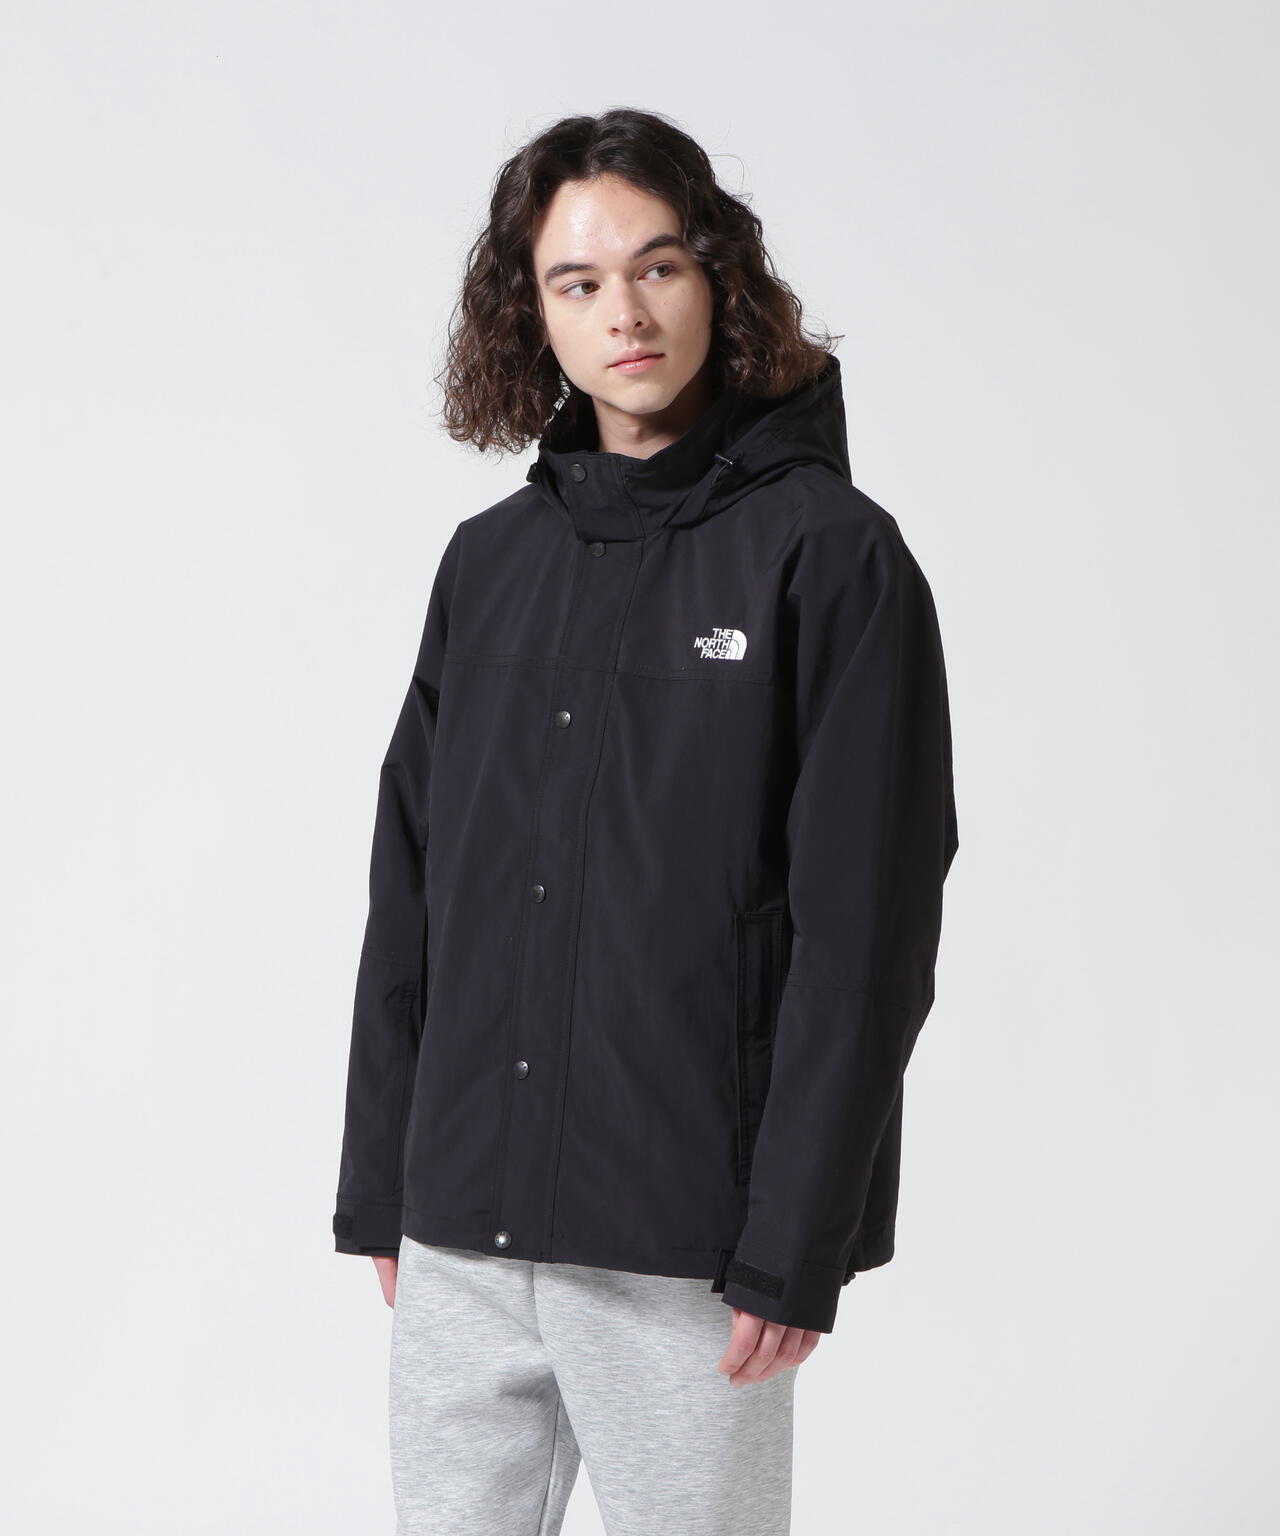 THE NORTH FACE Hydrena Wind Jacket